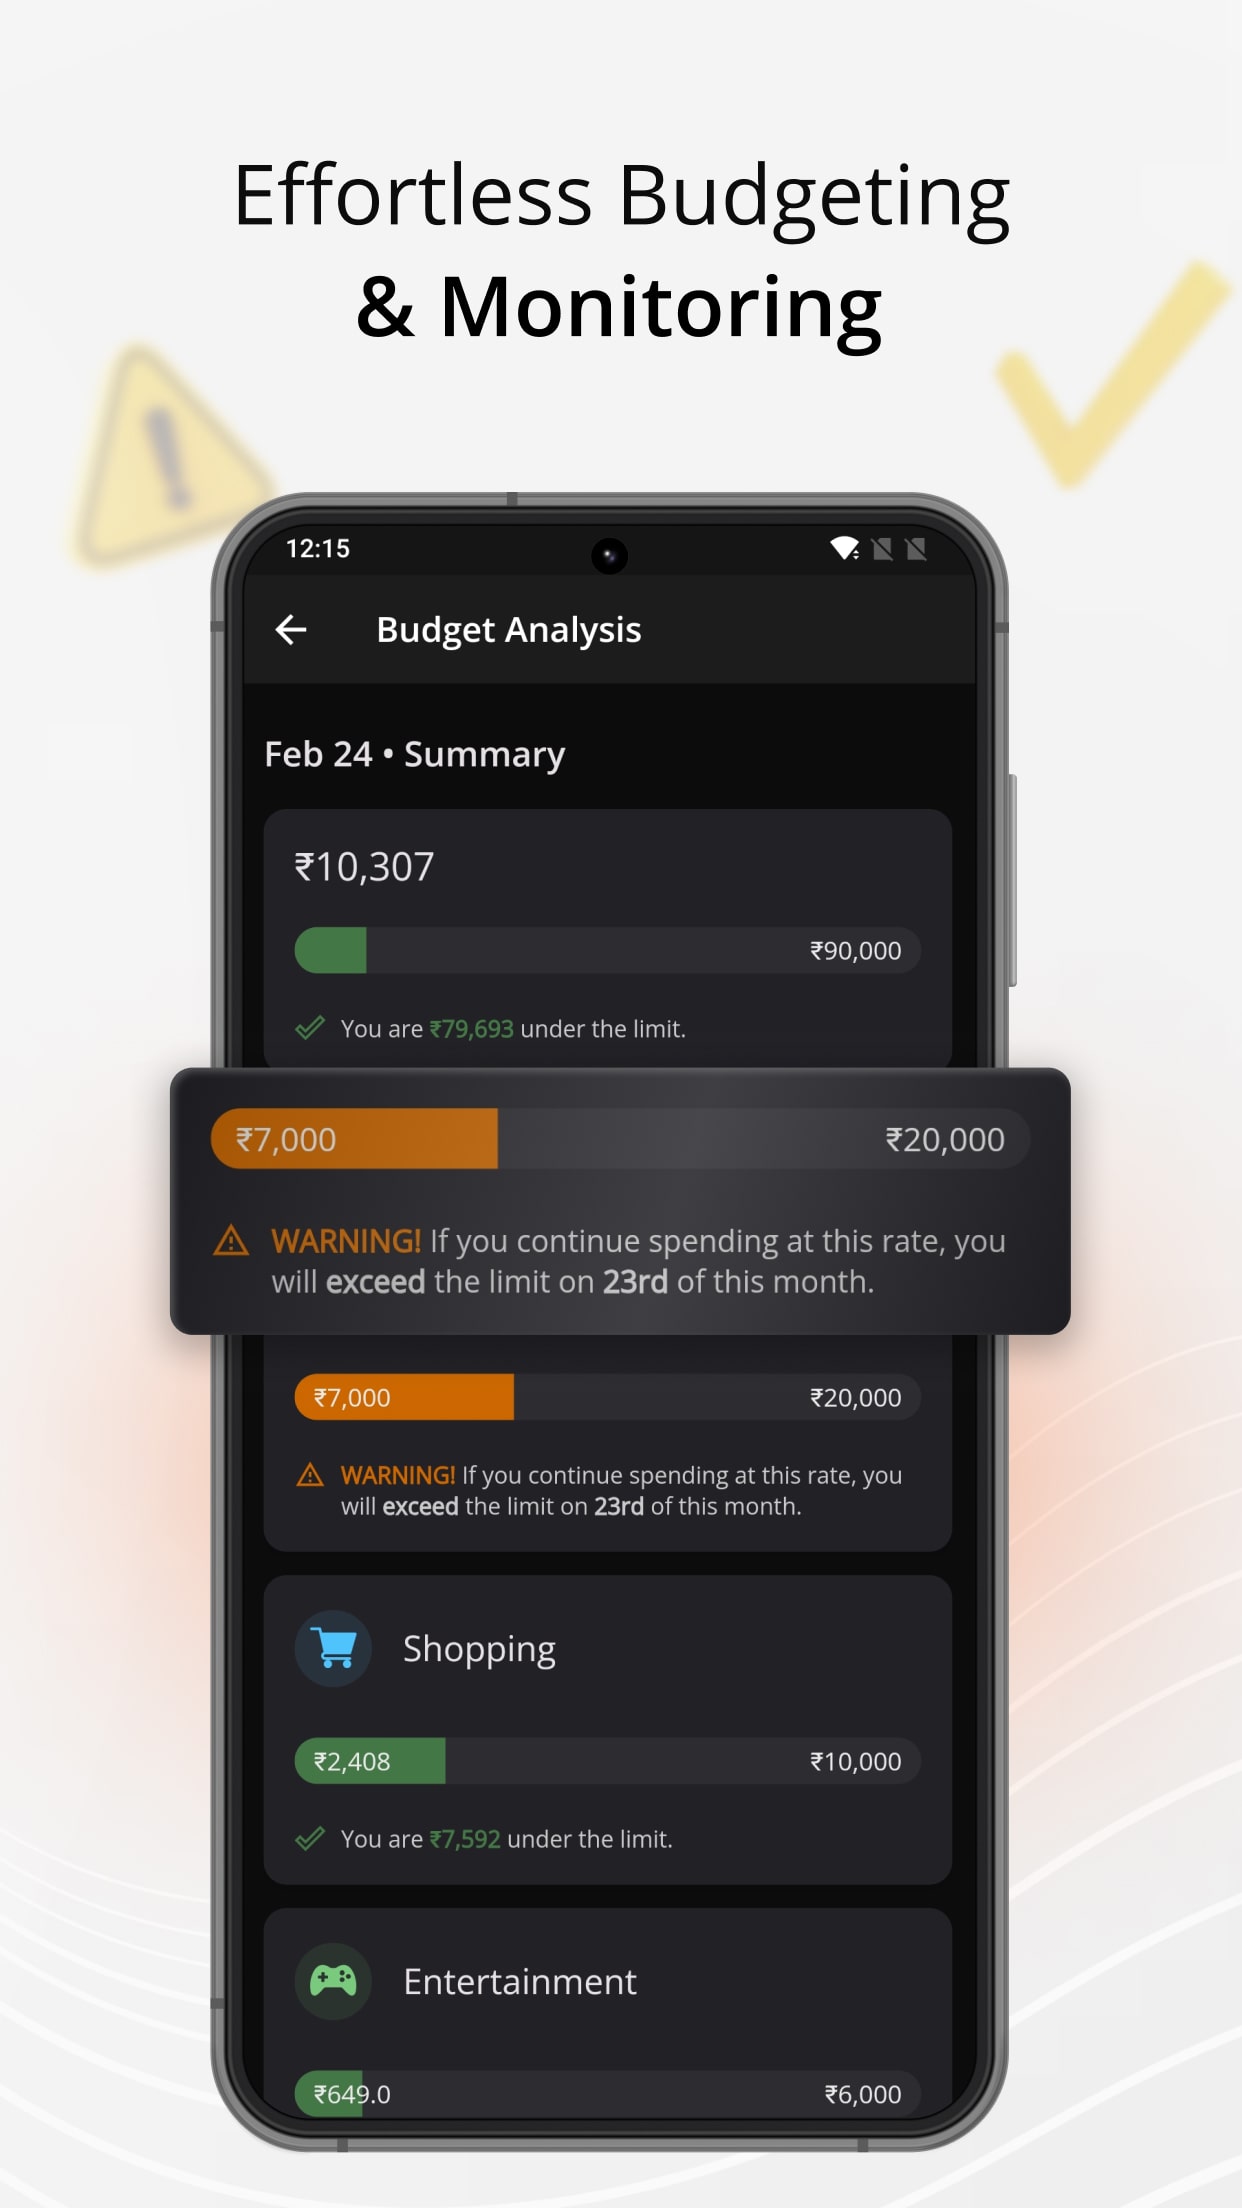 Effortless budgeting & monitoring - Expenses Manager